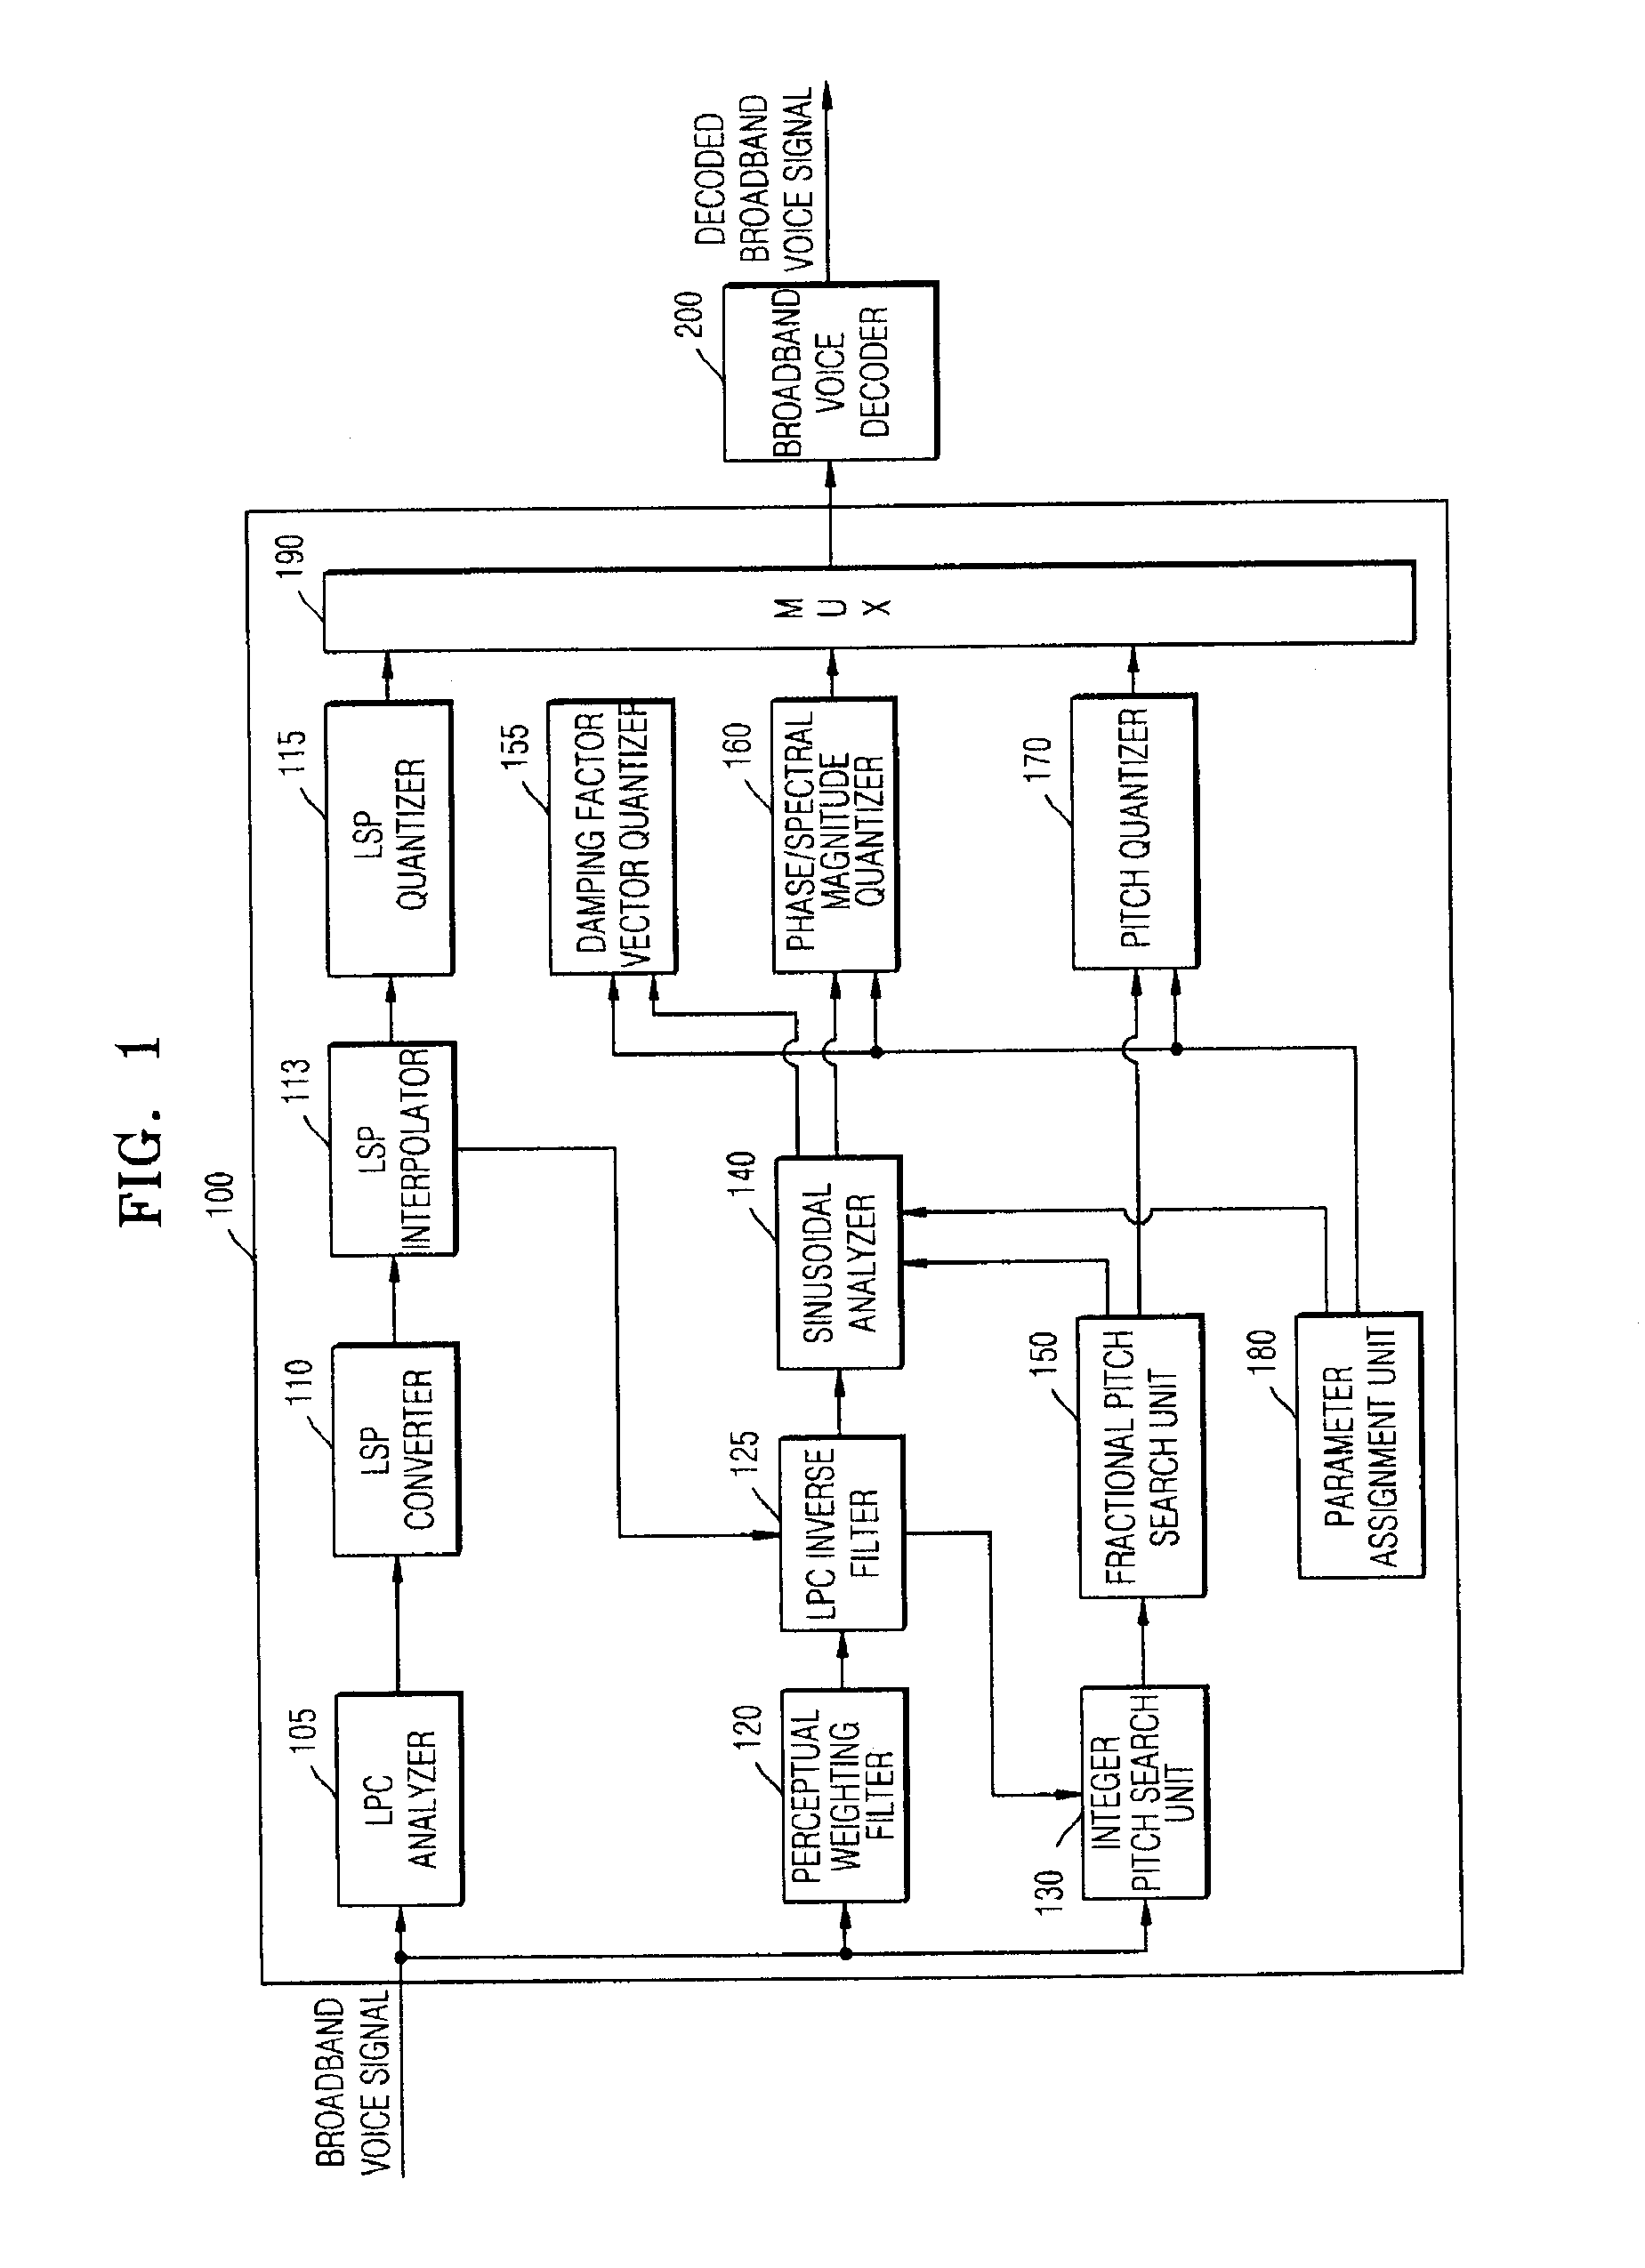 Method, apparatus and system for encoding and decoding broadband voice signal